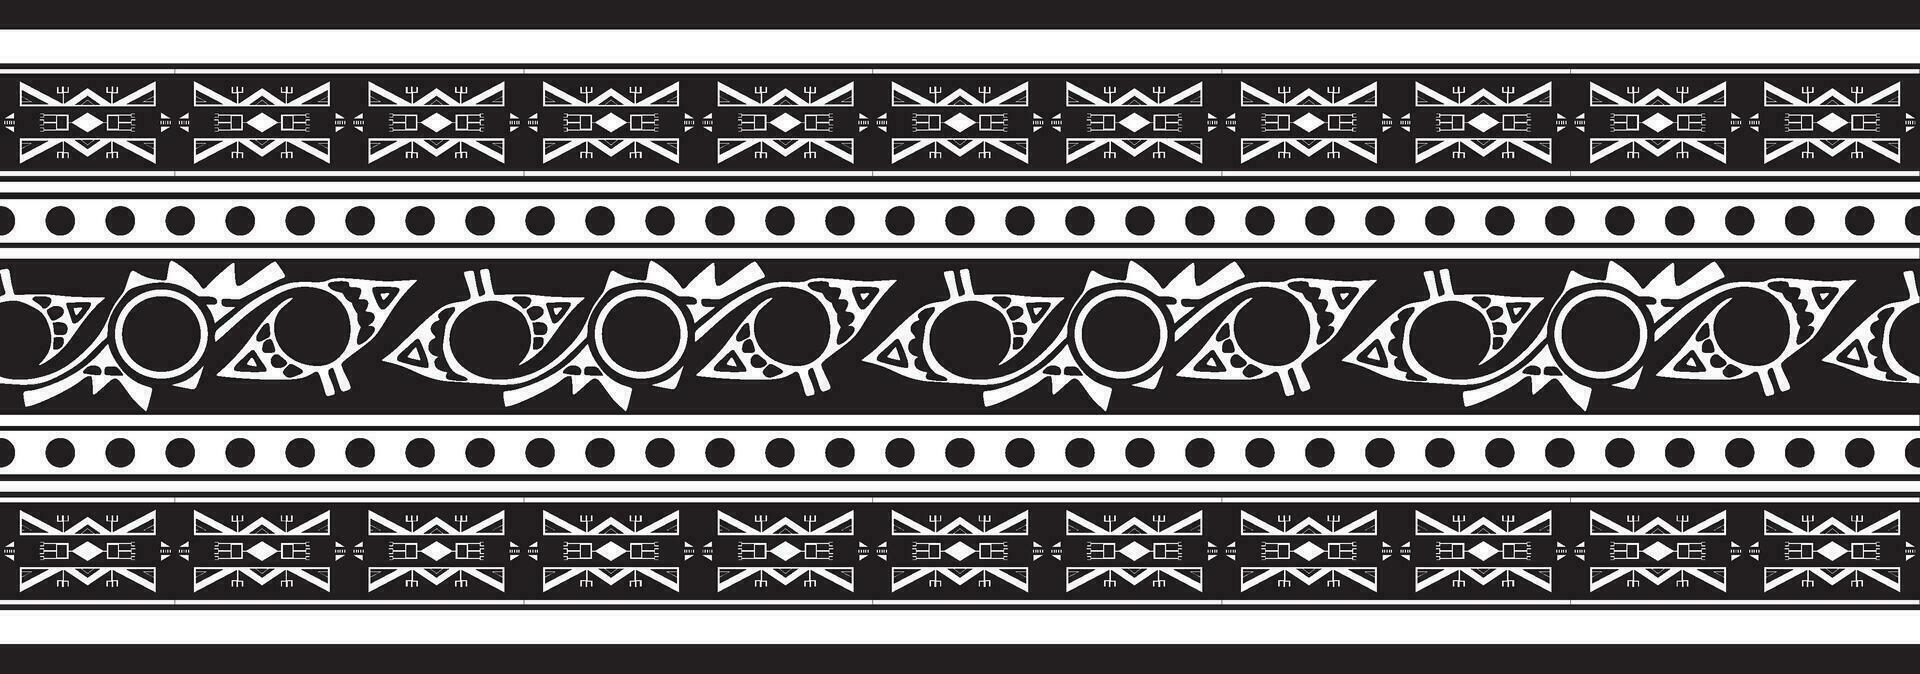 Vector monochrome seamless ornament of Native Americans, Aztecs. Endless border of the tribes of South and Central America